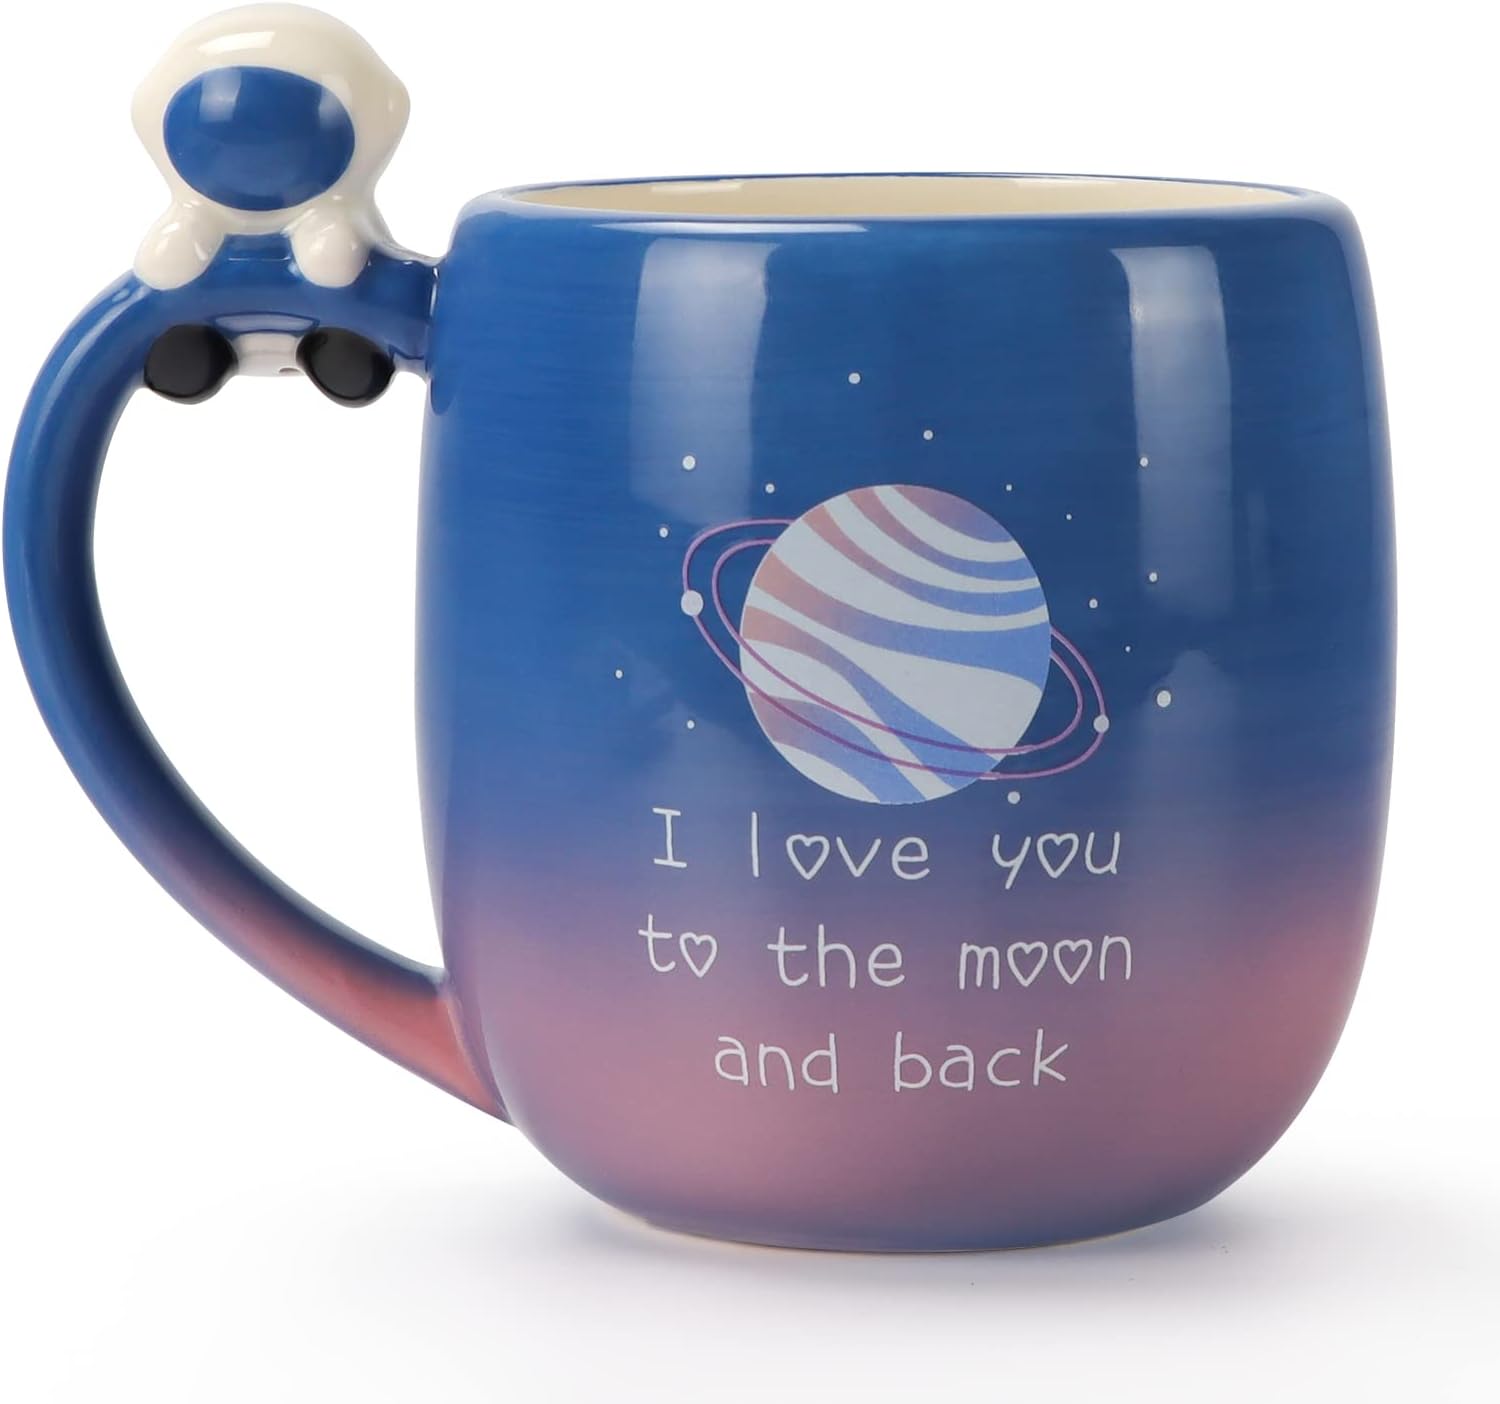 Lavezee I Love You to the Moon and Back Ceramic Mug with Handle, 16 Ounce Large Coffee Tea Cup Mugs Gift